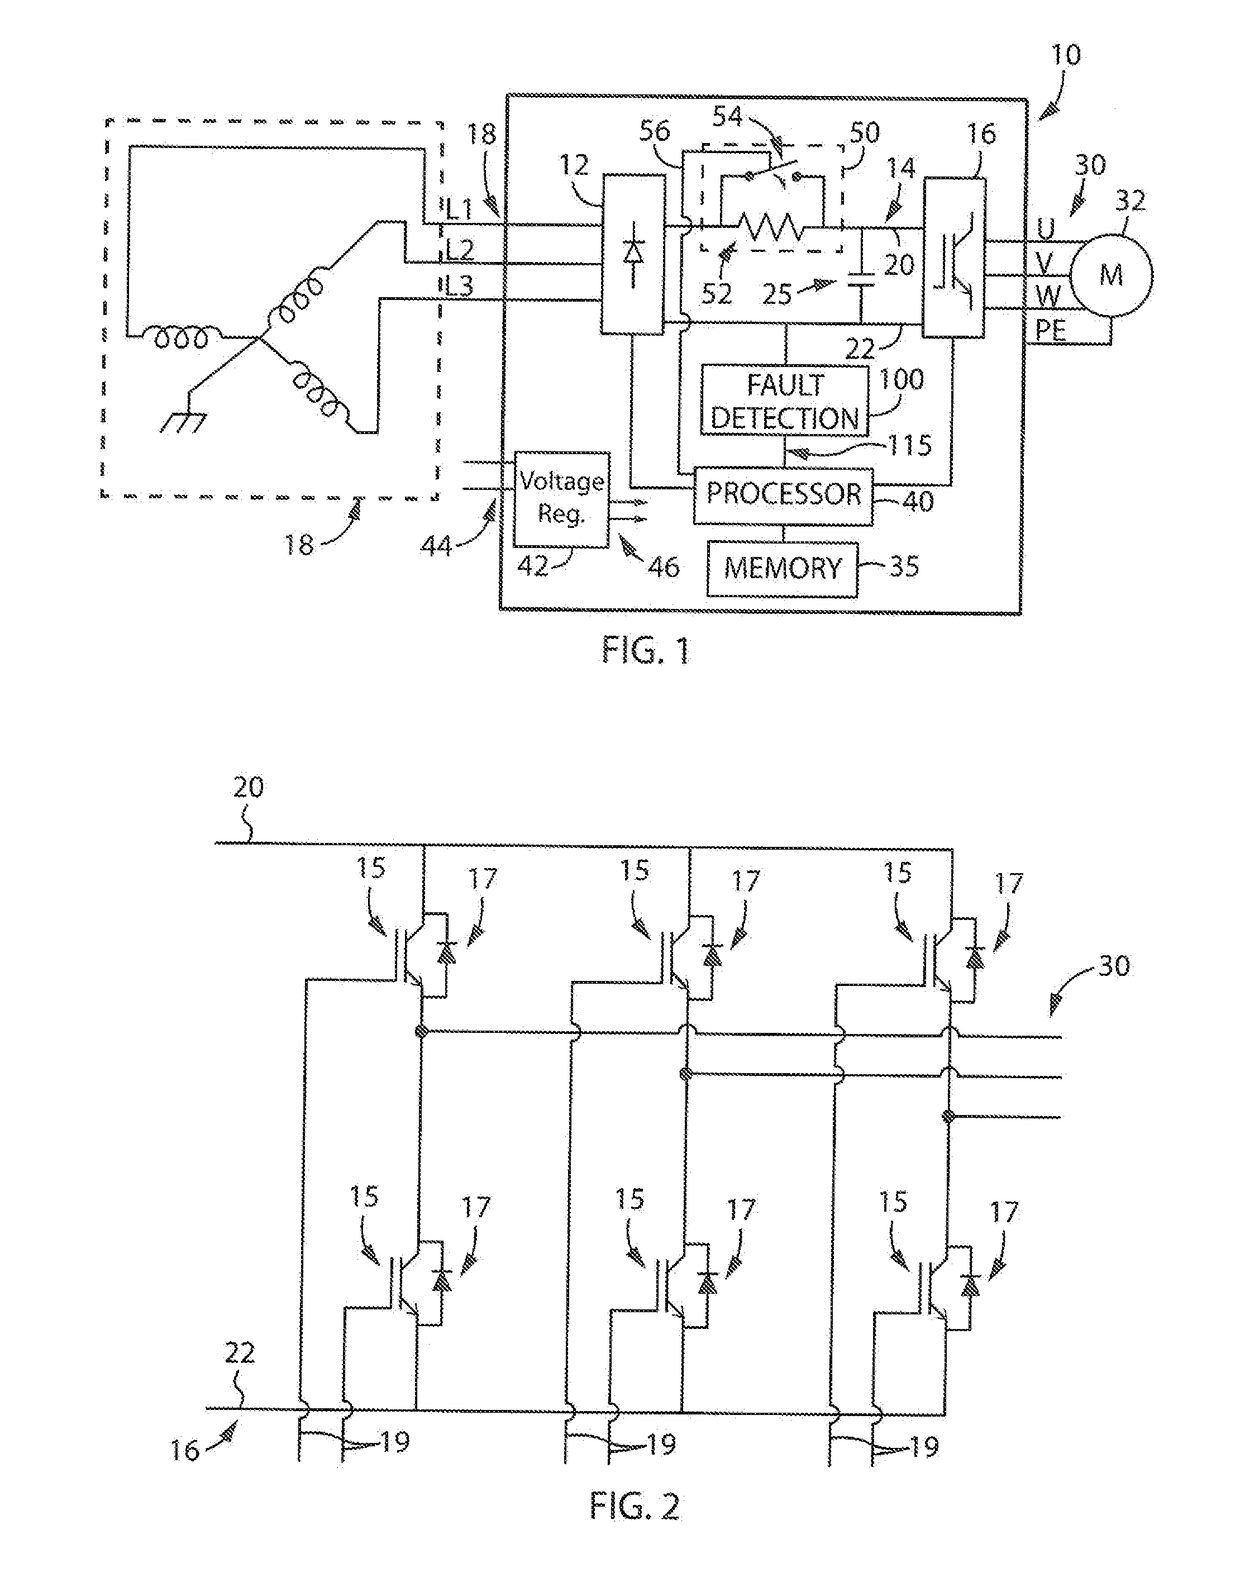 Method and apparatus for detecting ground faults in inverter outputs on a shared DC bus